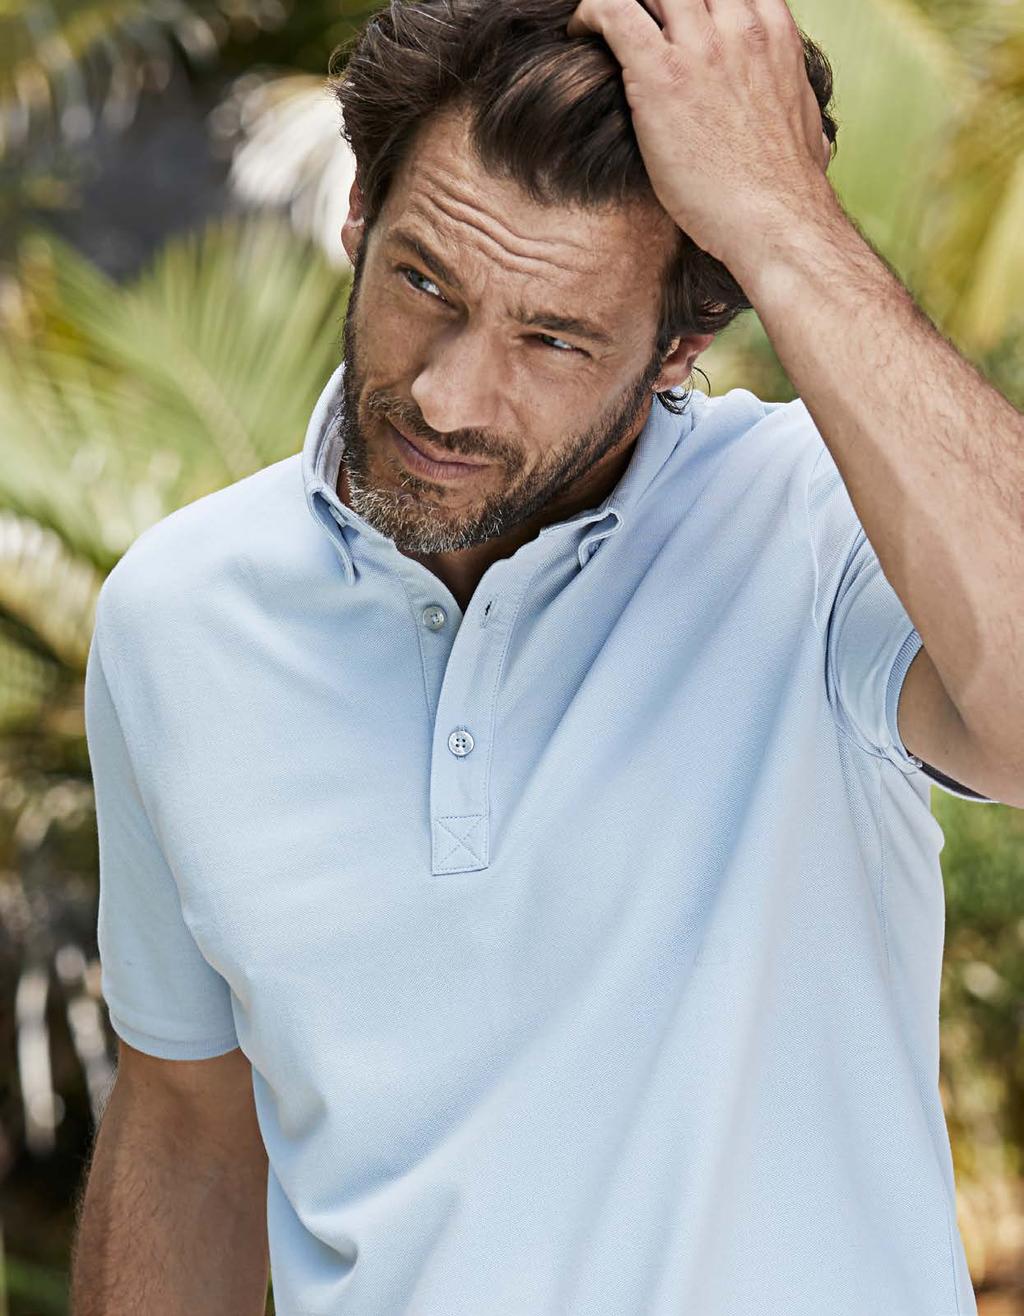 NEW STYLE White Denim Light Blue 1410 Mens FASHION LONG SLEEVE LUXURY STRETCH POLO Style 1412 Dress up without wearing a shirt.